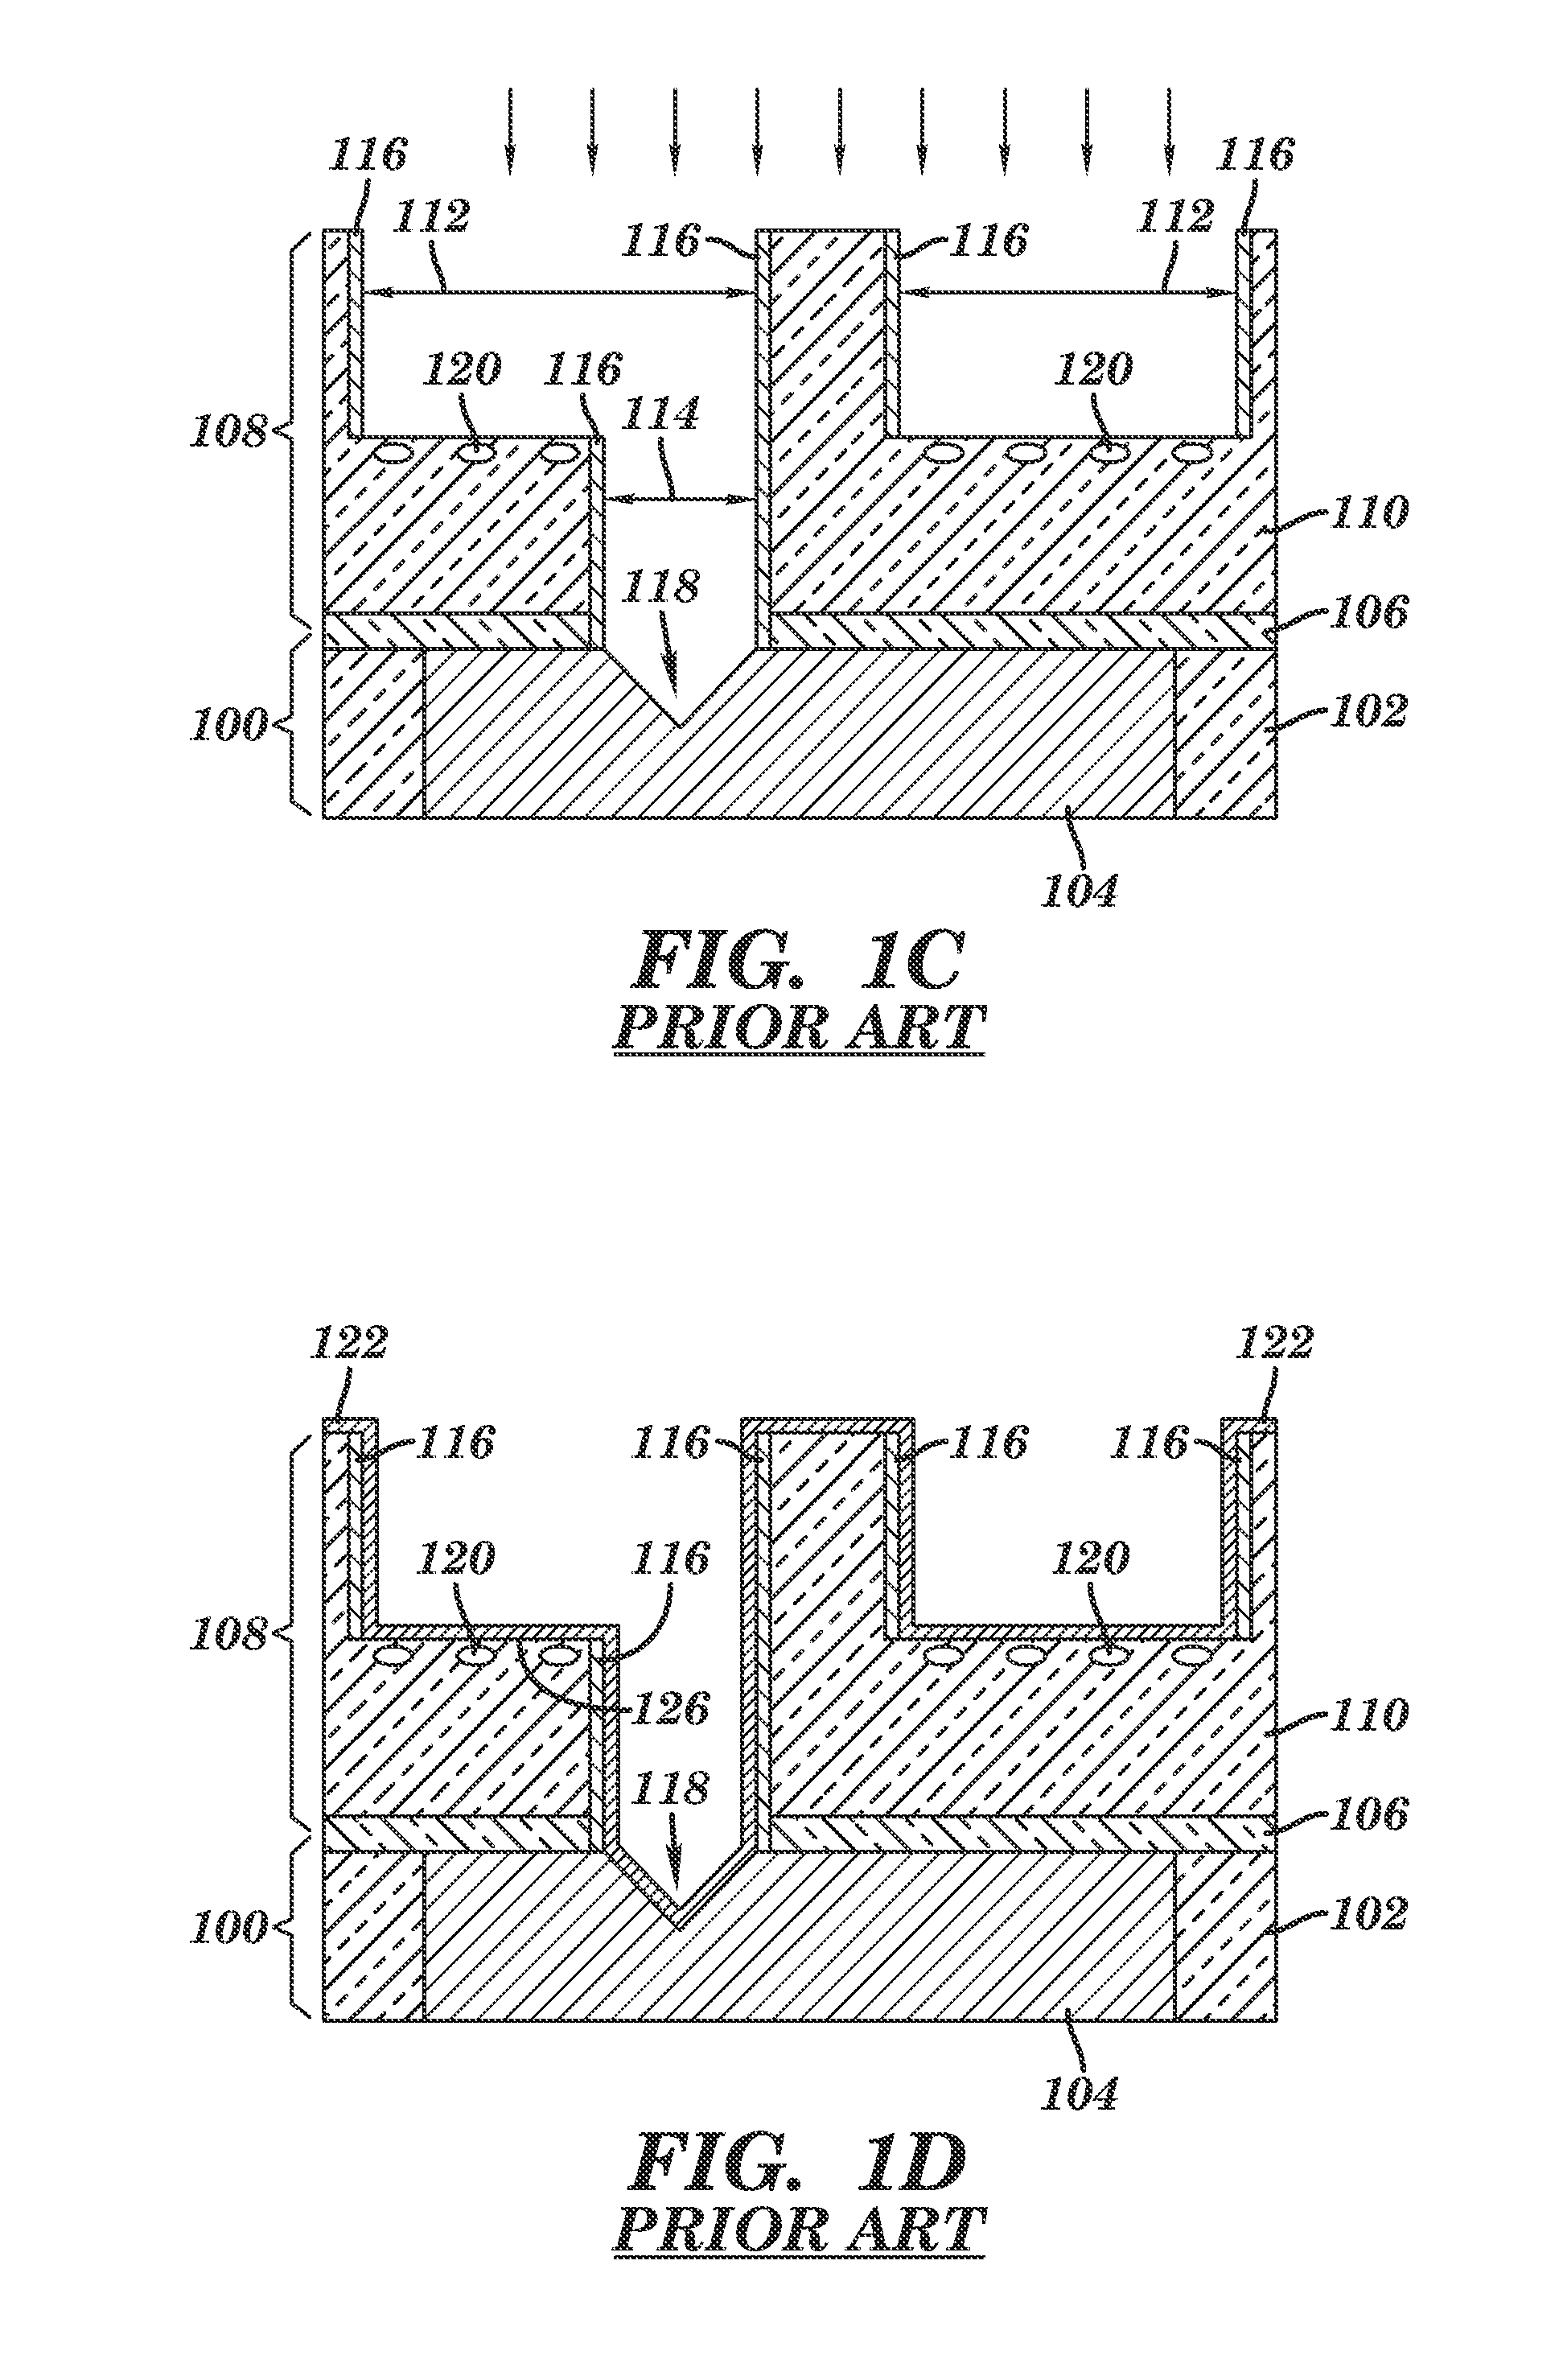 Interconnect structure having a via with a via gouging feature and dielectric liner sidewalls for BEOL integration